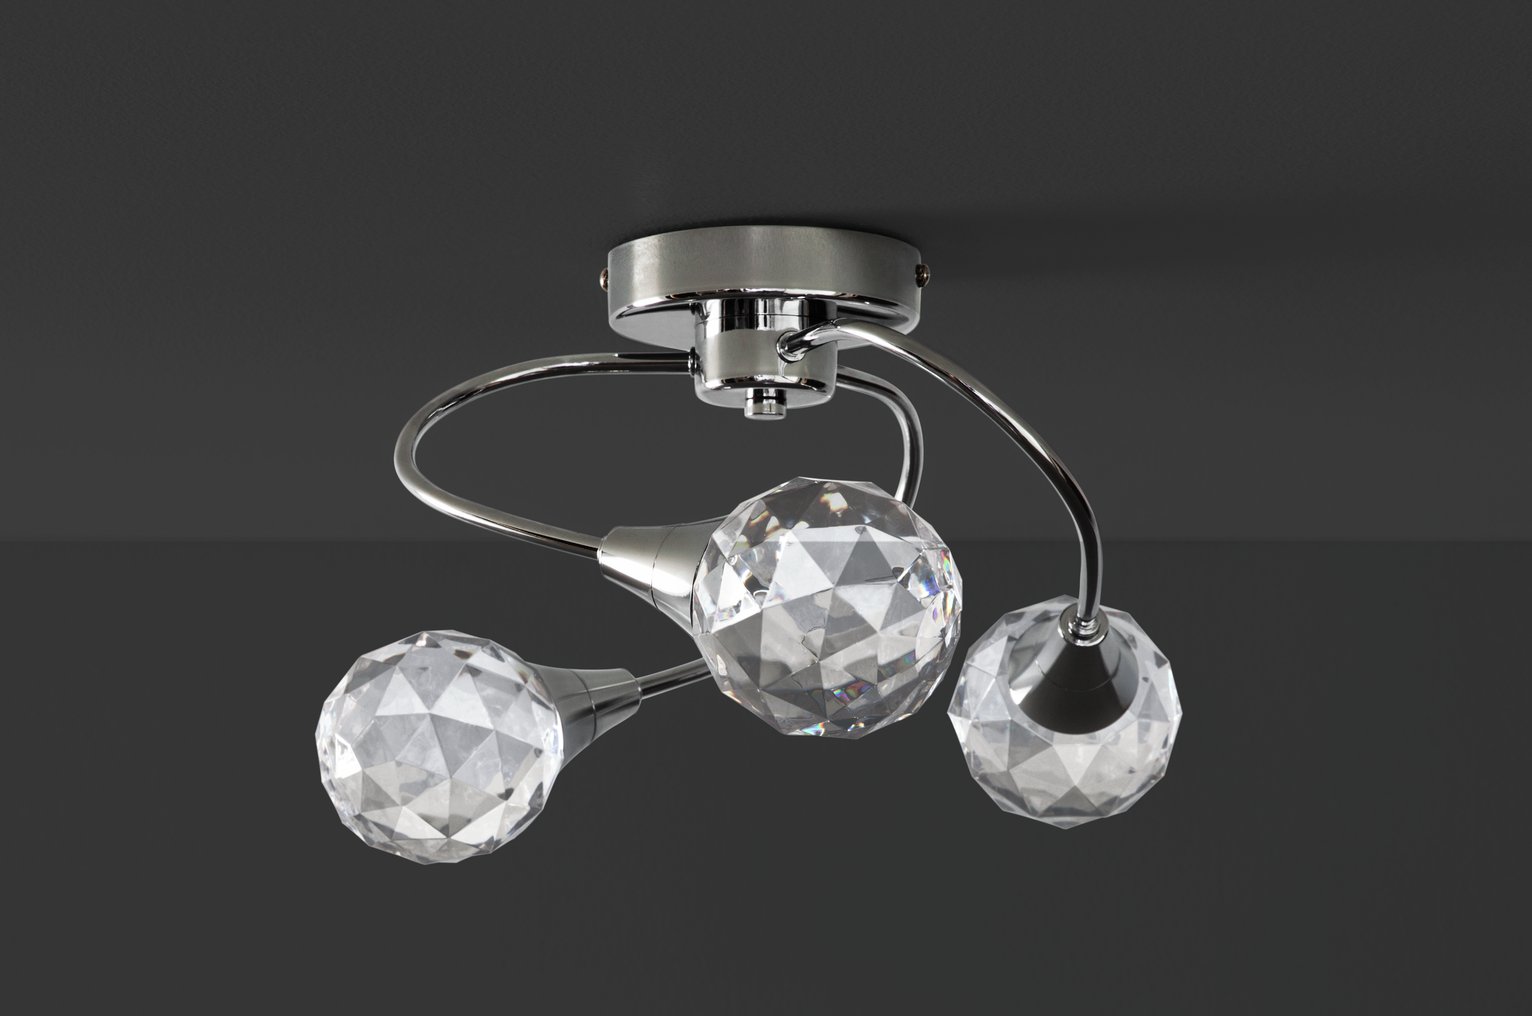 Argos Home Prism 3 LED Acrylic Faceted Ceiling Light -Chrome